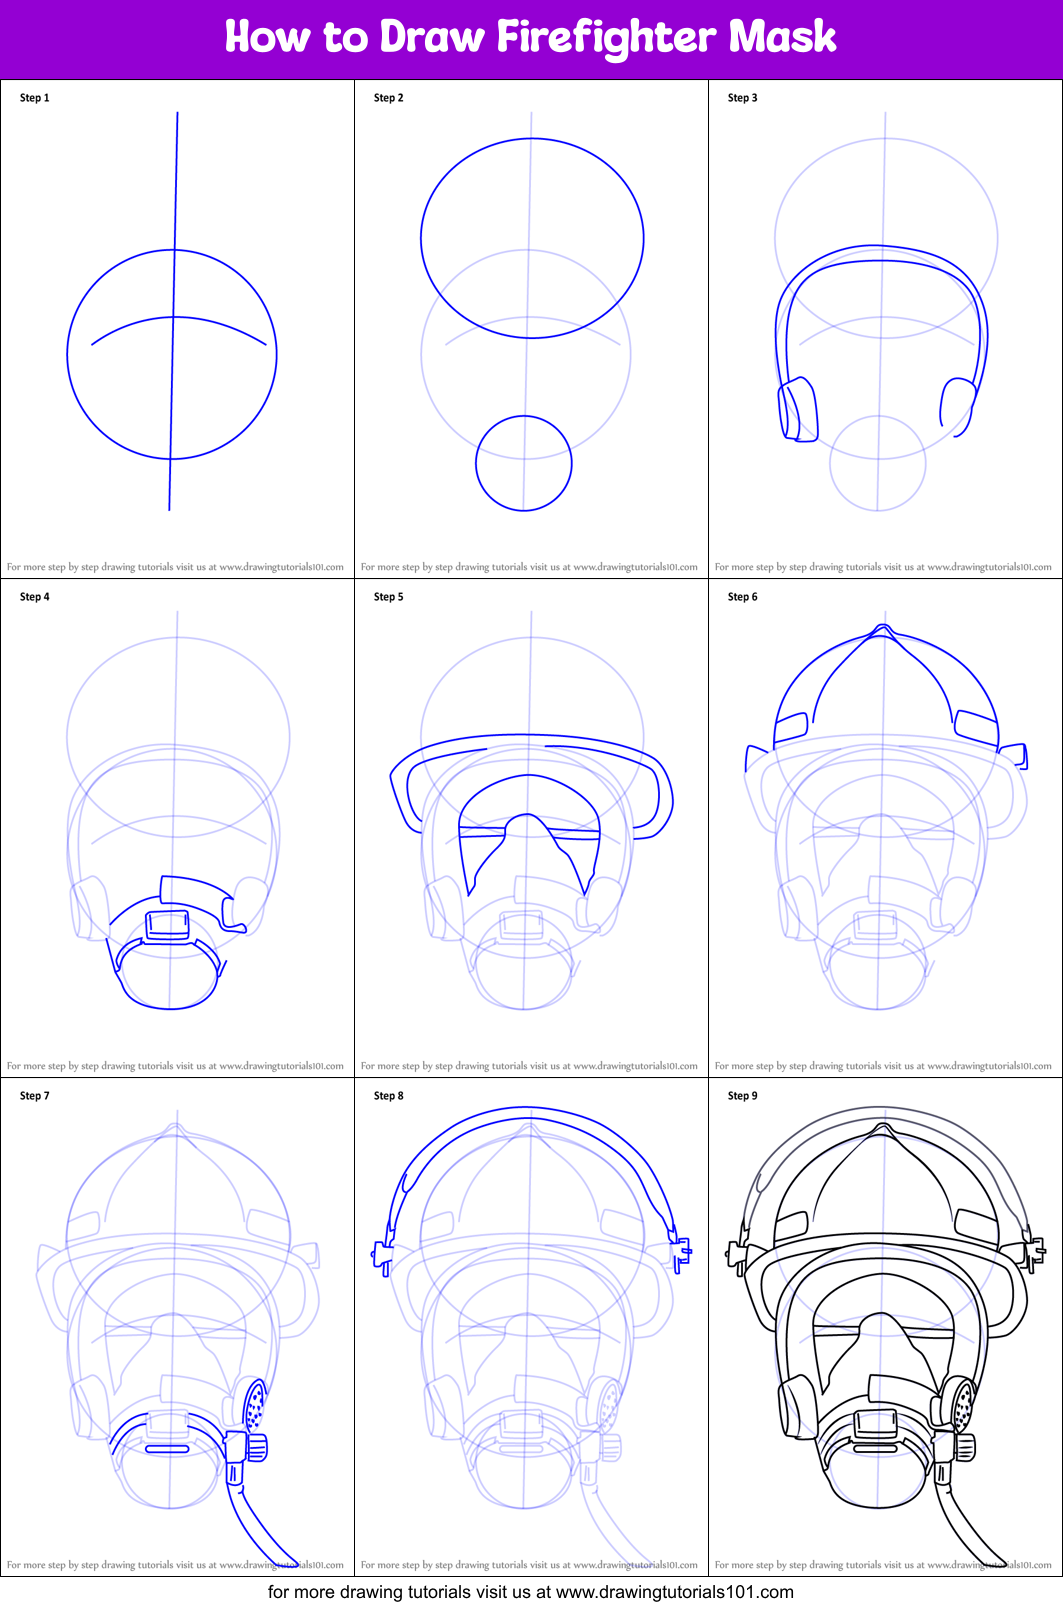 How To Draw Firefighter Mask Printable Step By Step Drawing Sheet Drawingtutorials101 Com - fireman mask roblox